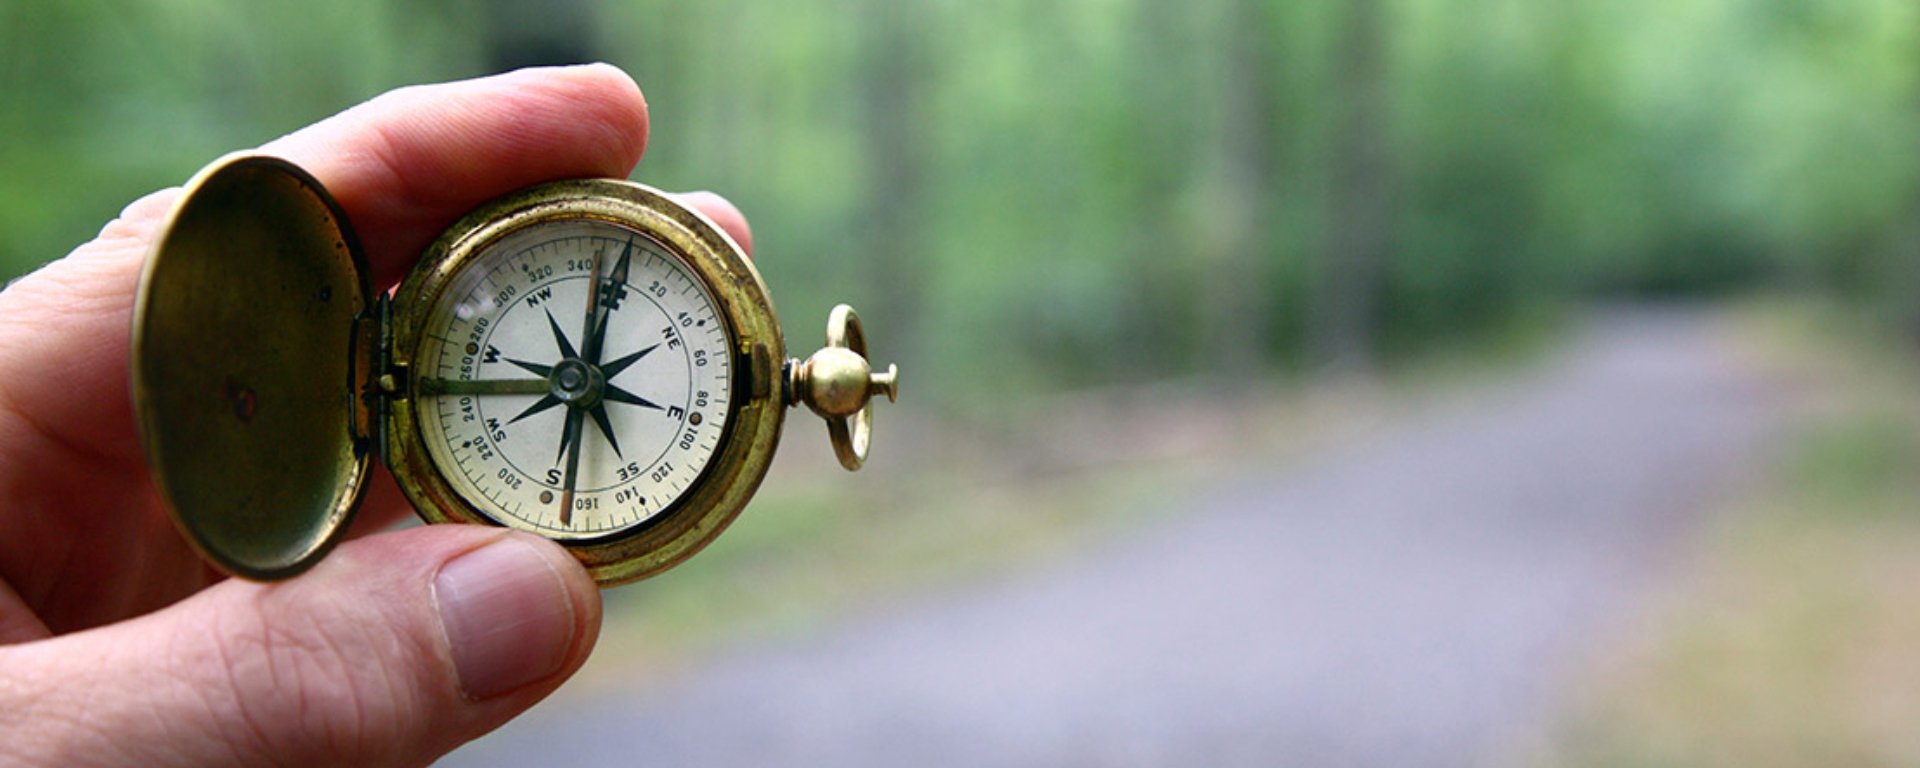 Hand holding a compass.